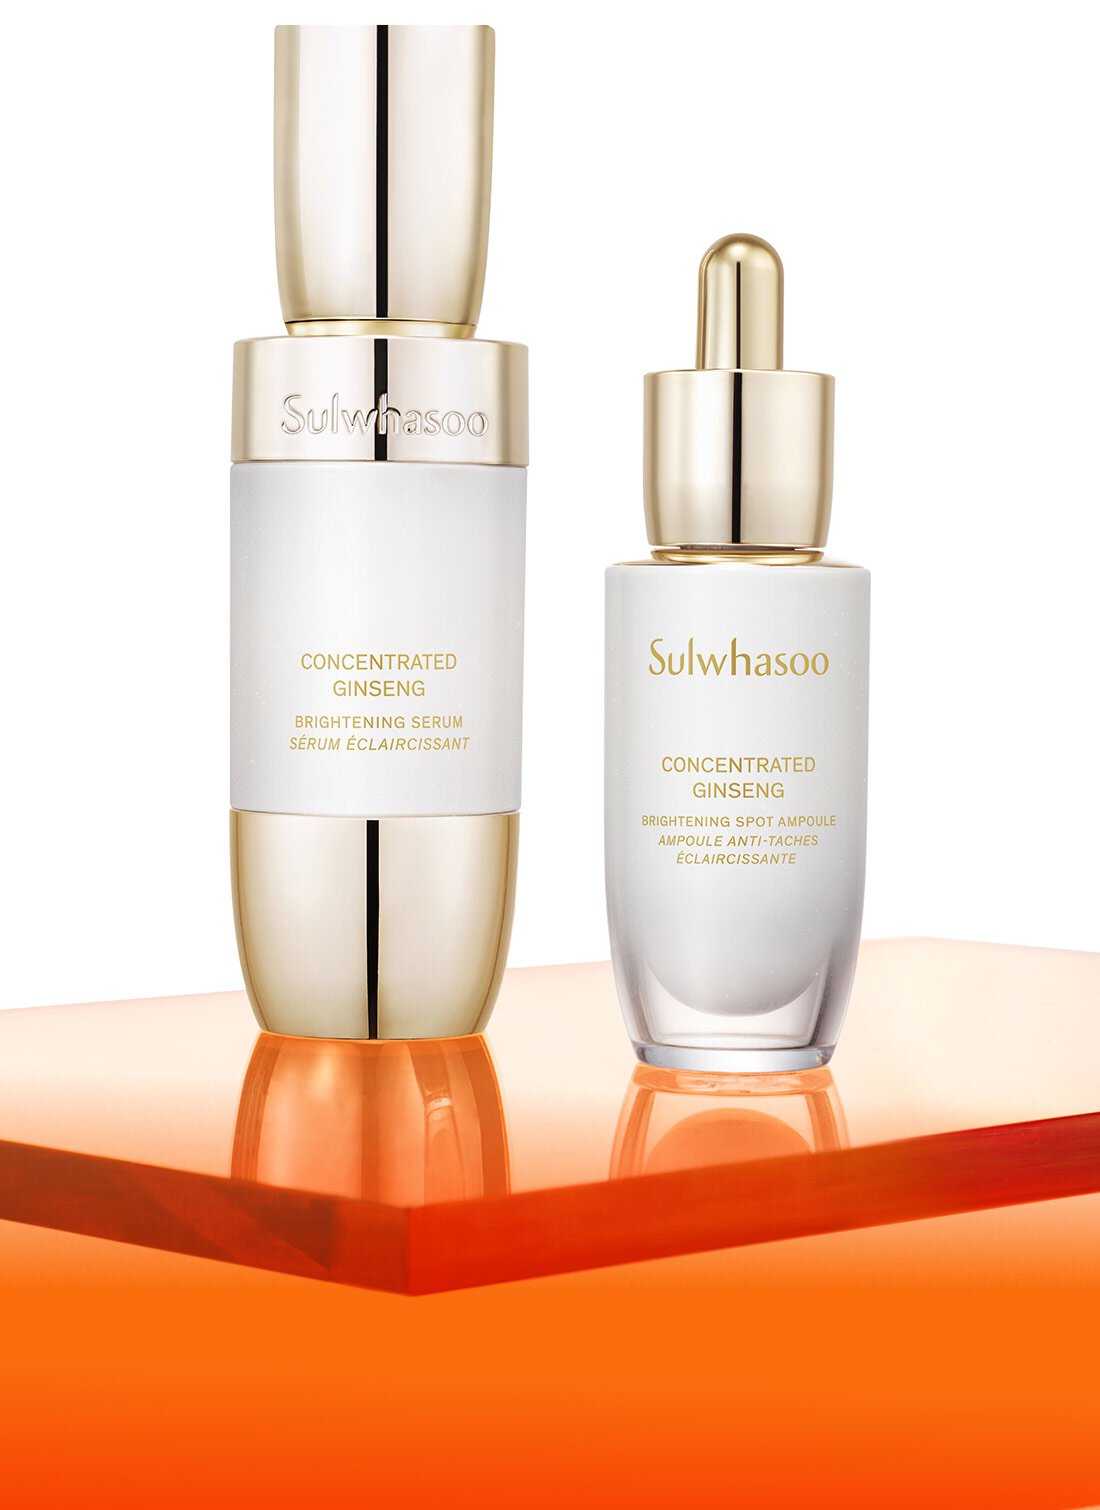 CONCENTRATED GINSENG BRIGHTENING SERUM ,CONCENTRATED GINSENG BRIGHTENING SPOT AMPOULE, firms skin from the inside out with its powerful anti-aging formula, lightens the appearance of dark spots and  uneven skin tone. The lightweight ampoule and face serum deliver a smooth finish without leaving a sticky residue.